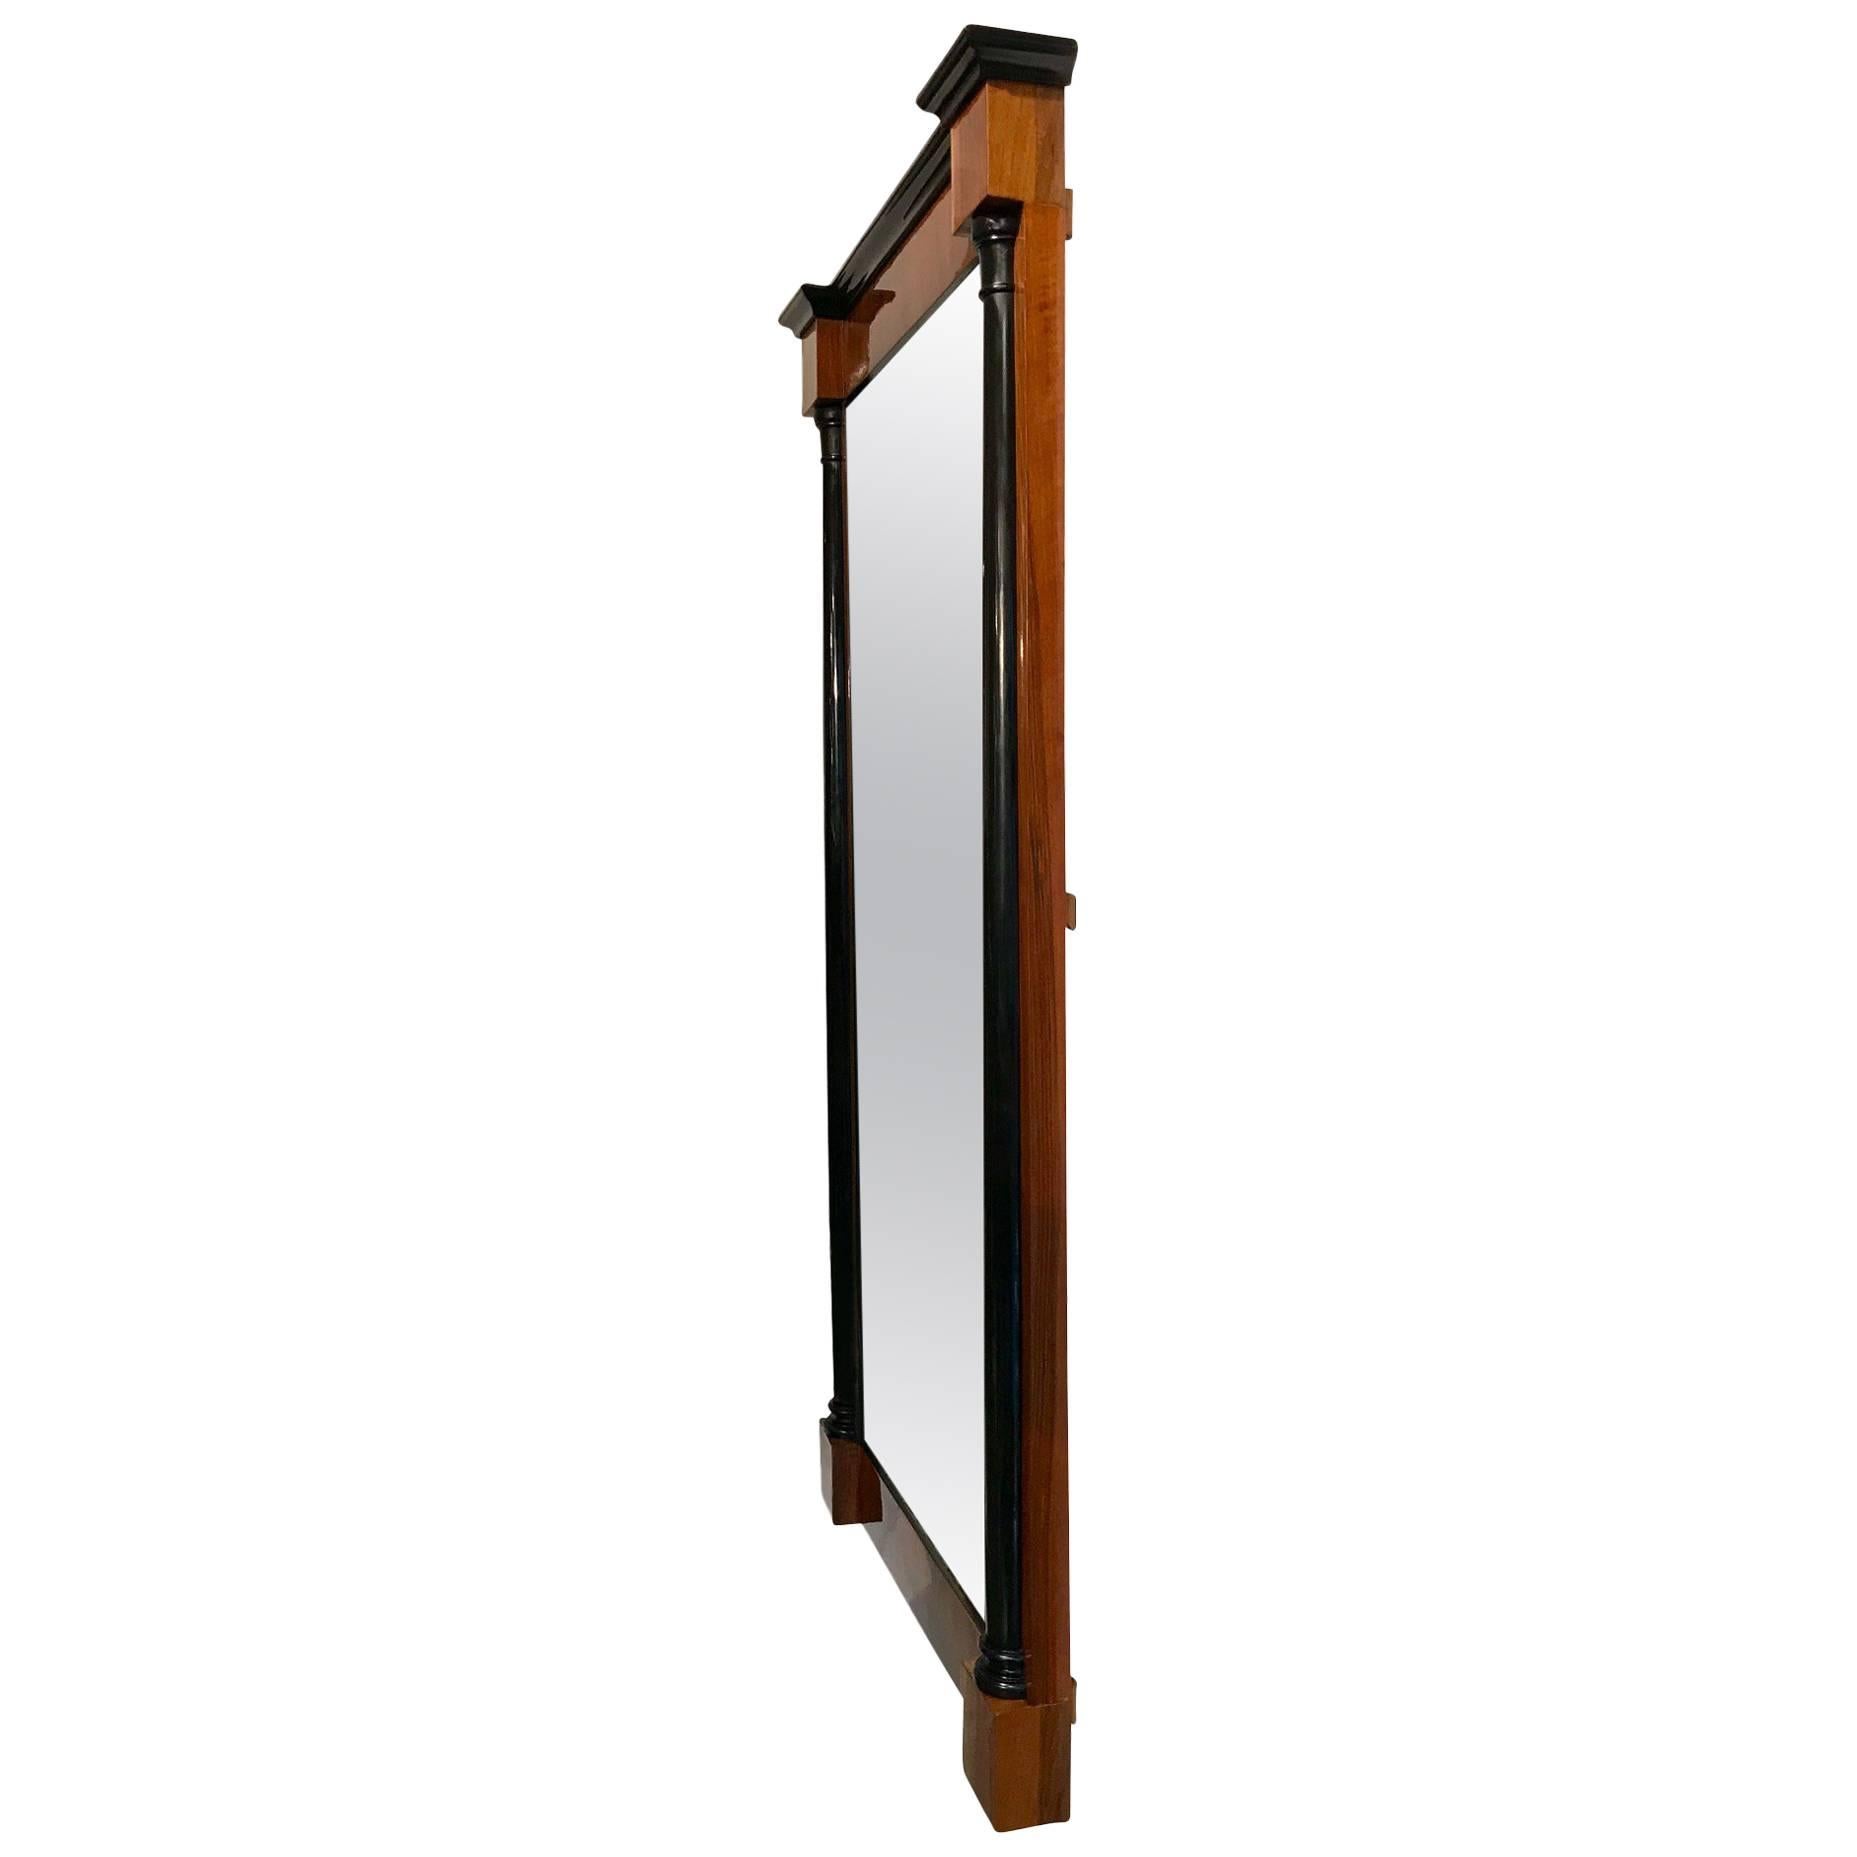 Beautiful, rare and big neoclassical Biedermeier wall mirror from South Germany, circa 1830.
Walnut veneered and hand polished with shellac (French polished). Two ebonized half columns and old mirror glass.